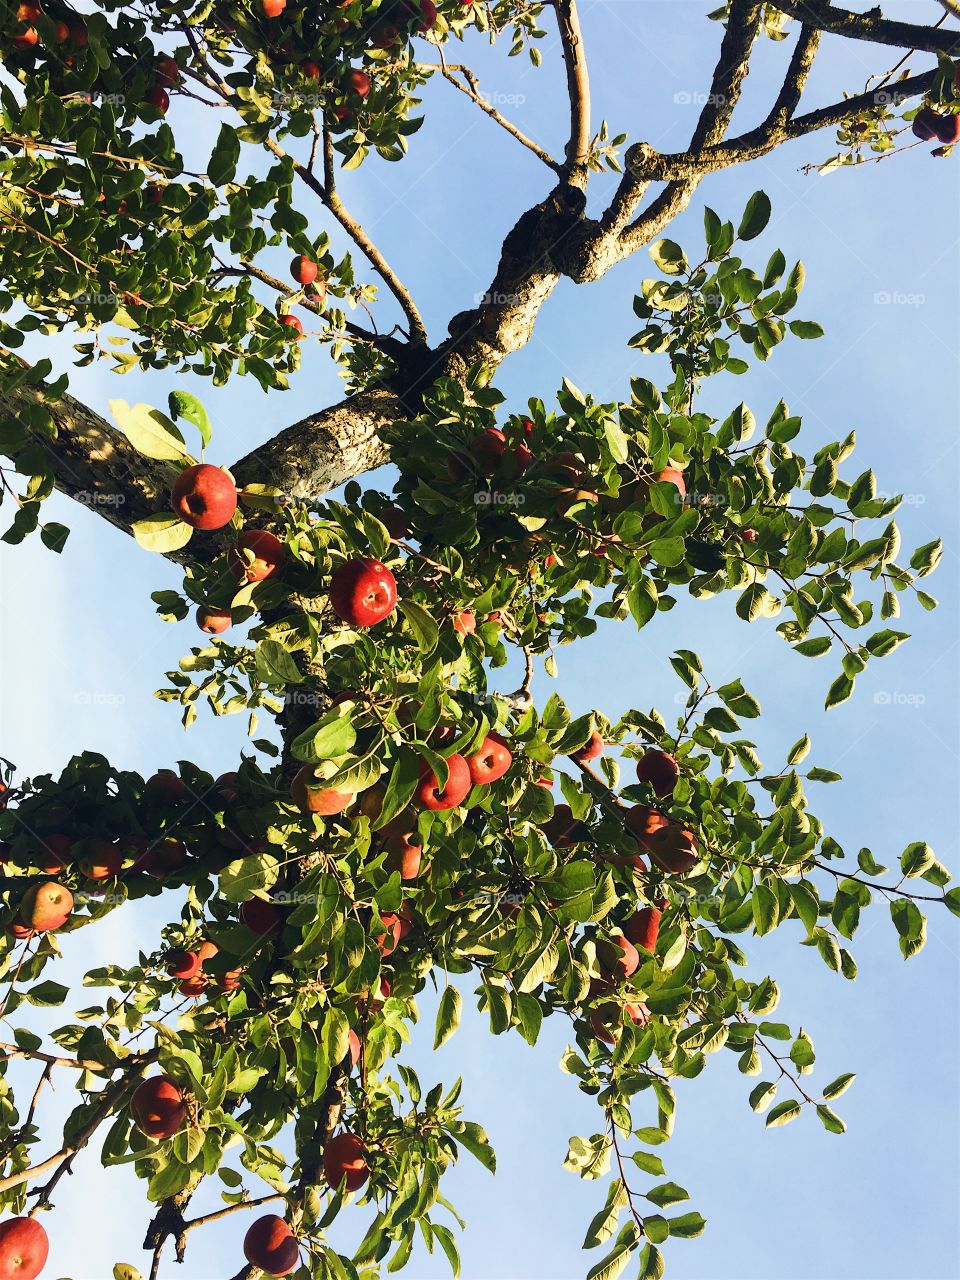 Looking up at an apple tree